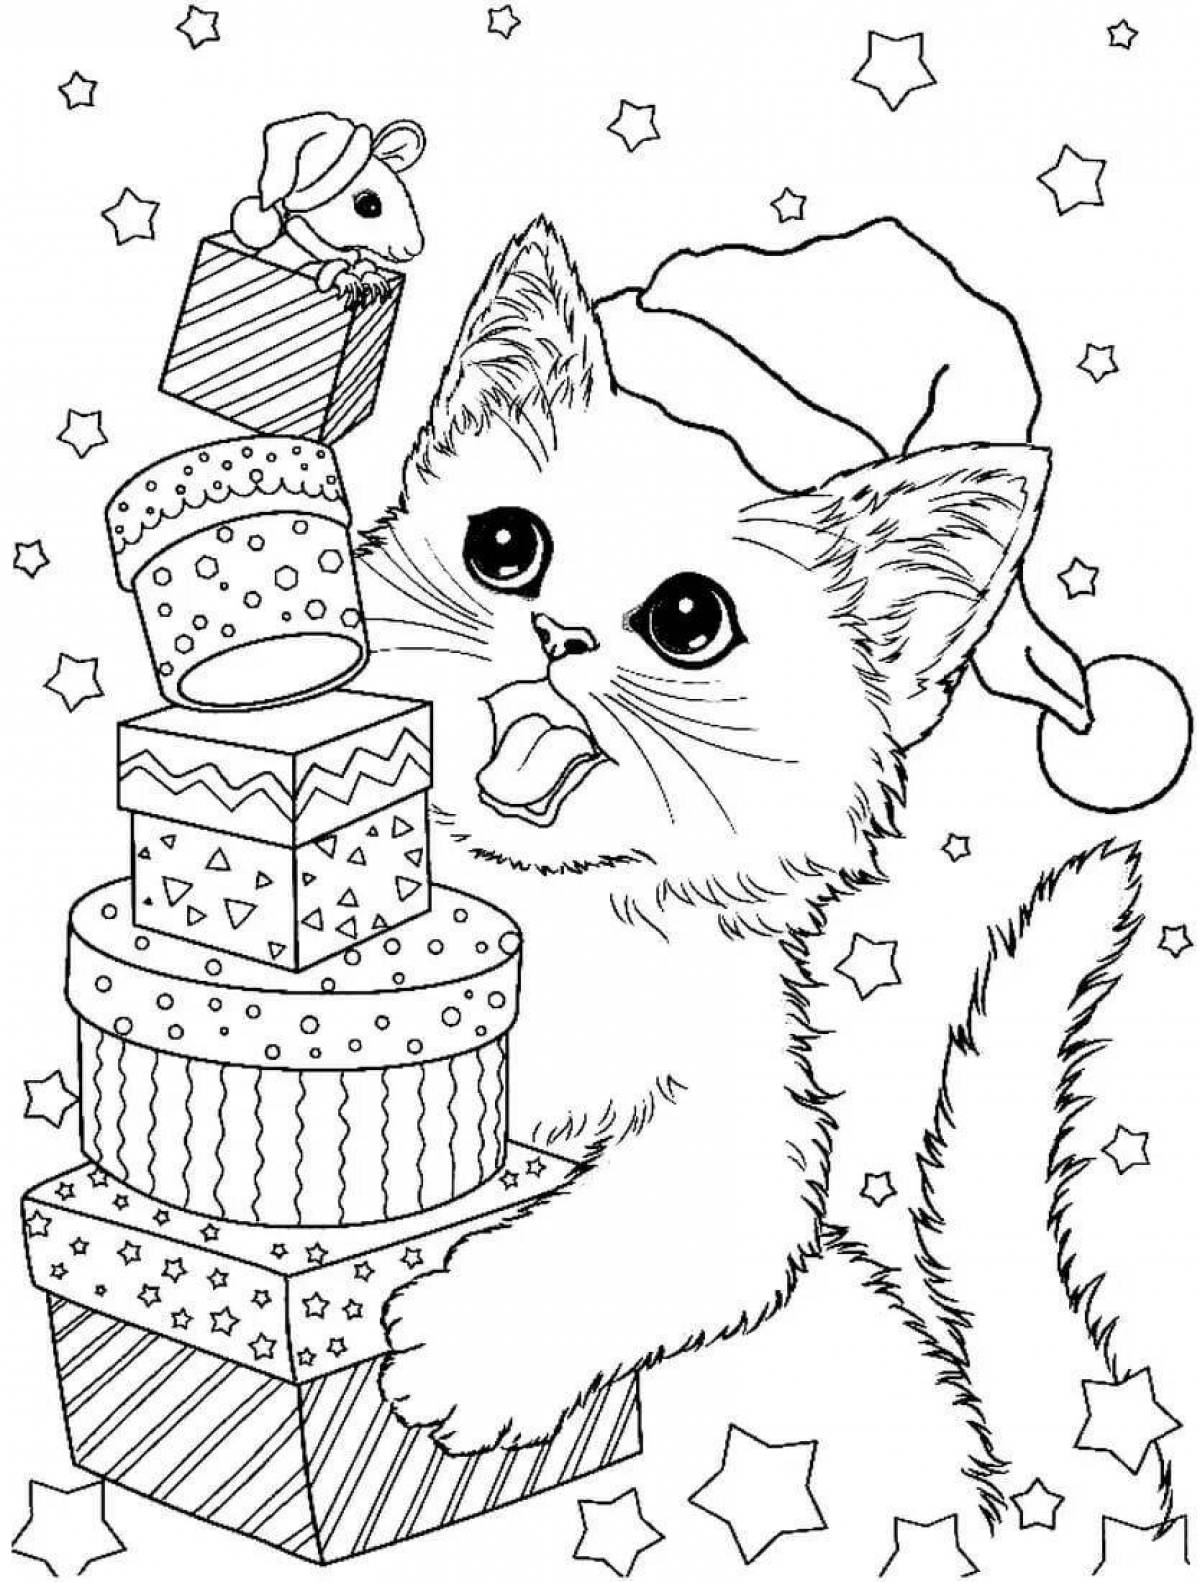 Adorable Christmas kittens coloring page